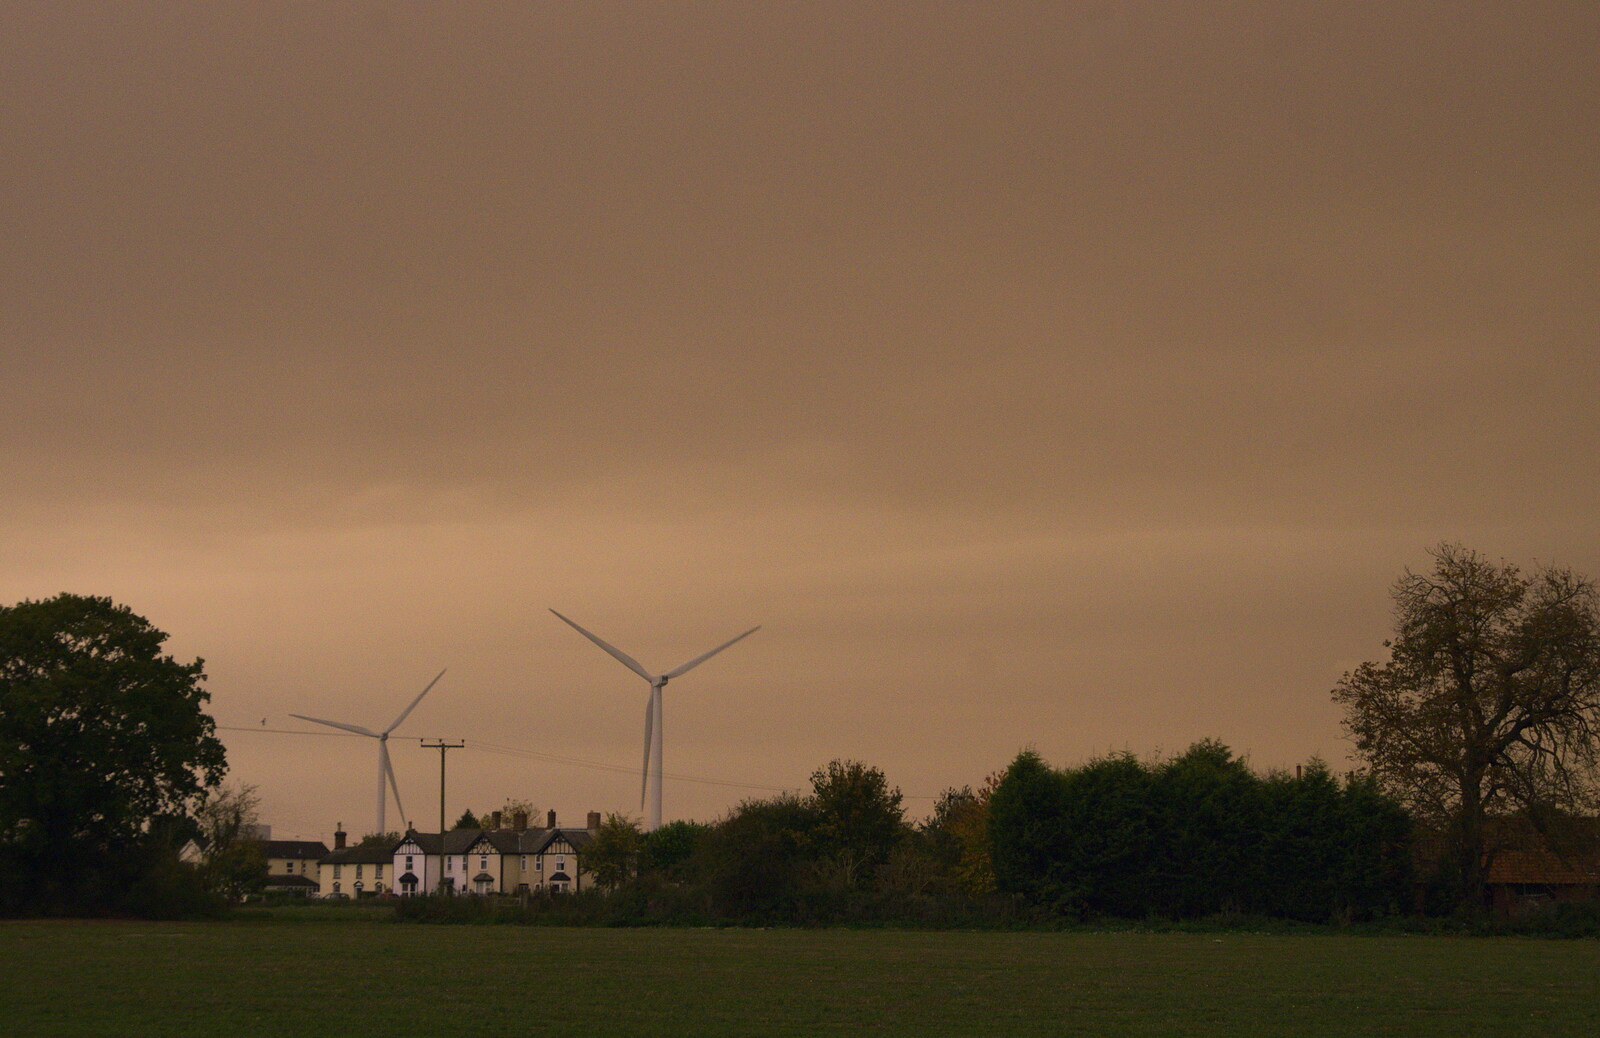 Strange skies over the wind turbines from Skate Parks and Orange Skies, Brome and Eye, Suffolk - 10th October 2017